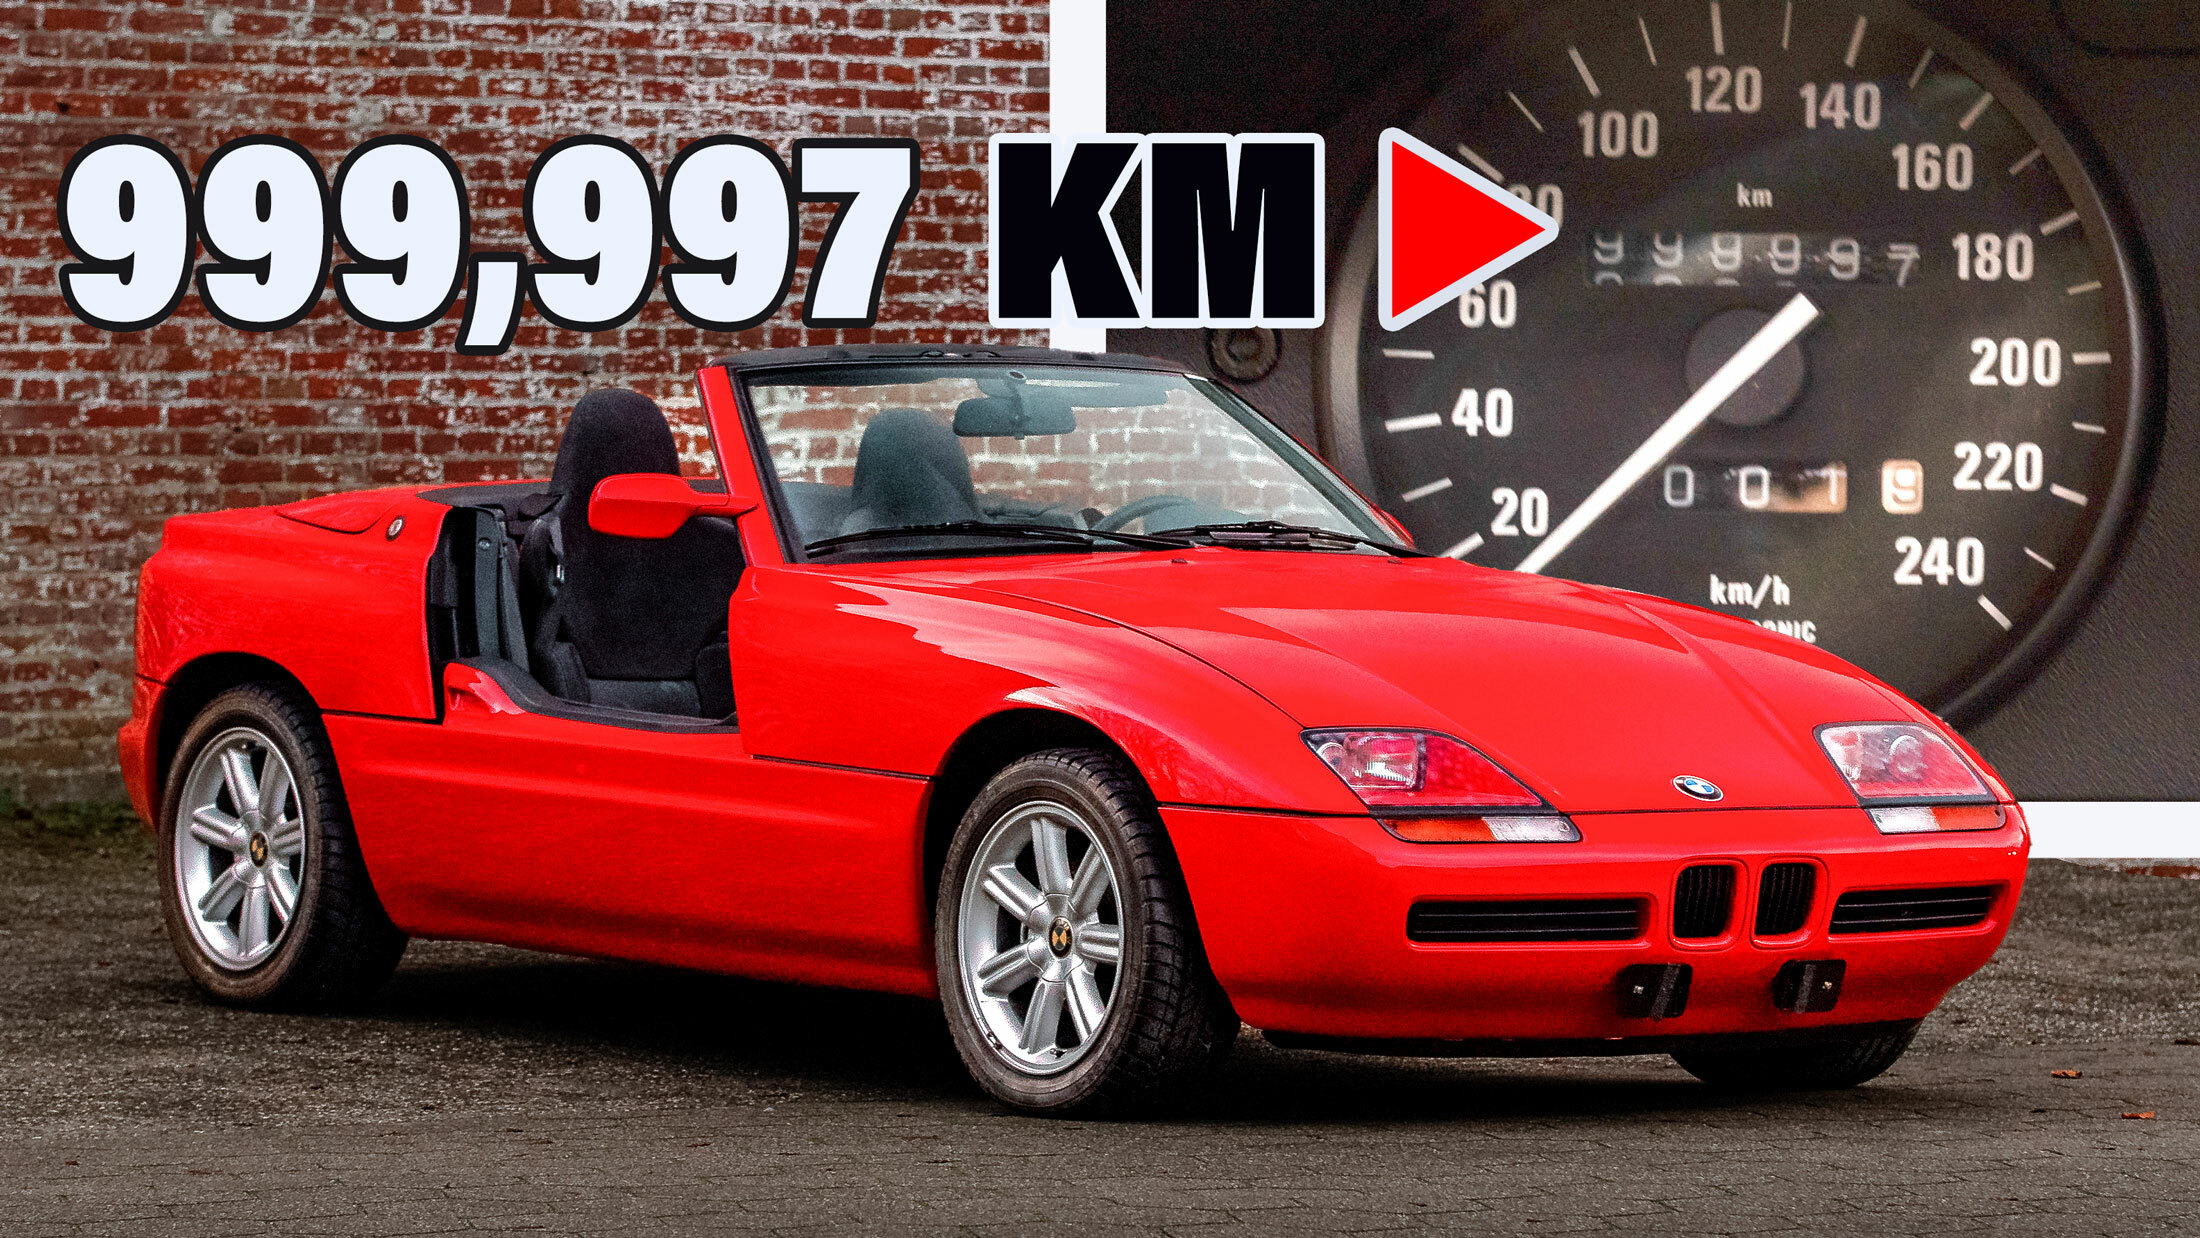 The Curious Case Of The Brand New 1990 BMW Z1 With 999,997 KM | Carscoops